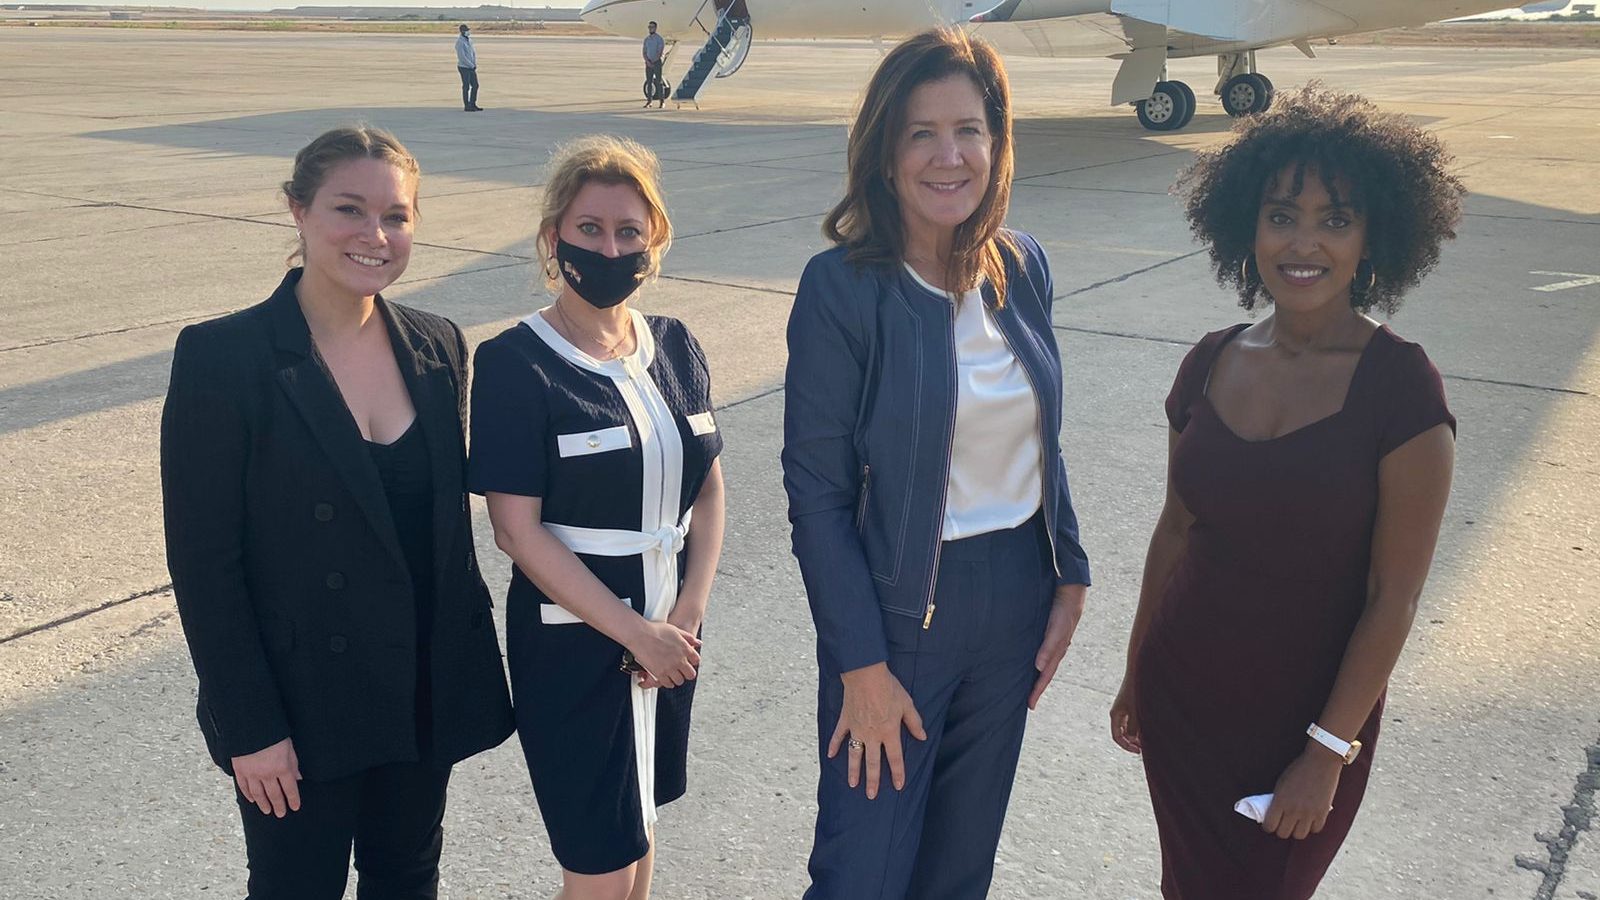 Photo of Yifter (right), Amb. Shea (second-to-right) and two other people, all in professional clothes, smiling on an airport runway with a plane behind them.